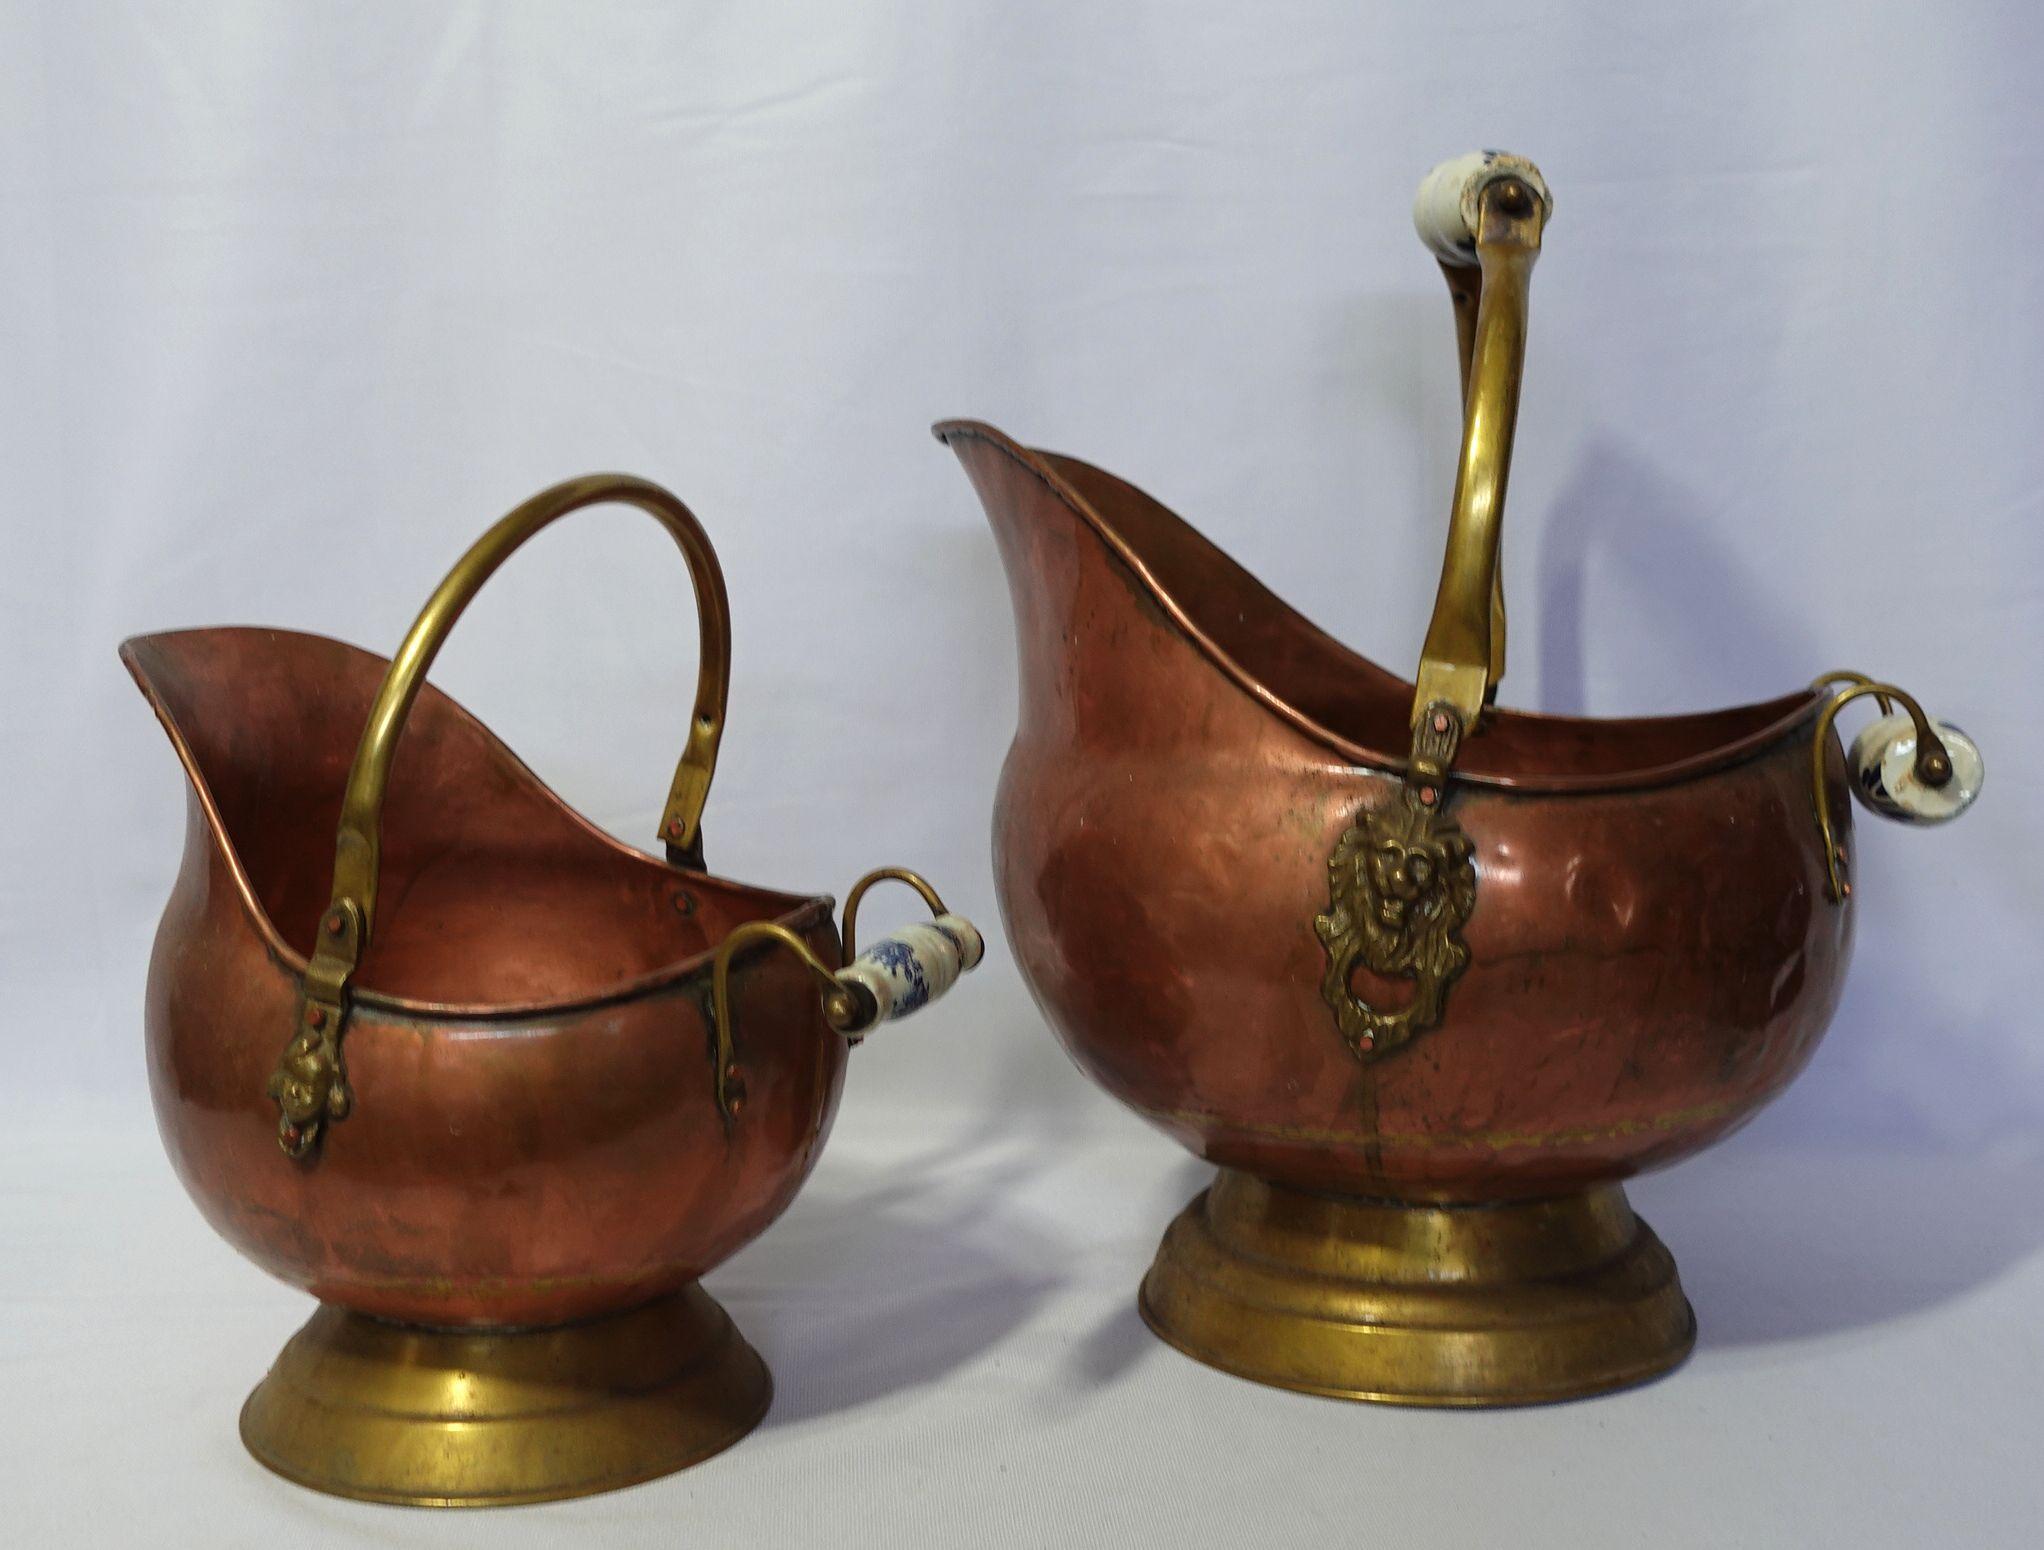 Antique 2 Hand Hammered copper coal scuttles with blue and white ceramic handles and brass lion head accents in the large one, and the medium one with a girl's head.
Large: 15” from handle to spout. 12” wide and 16” tall with the handle up. Some